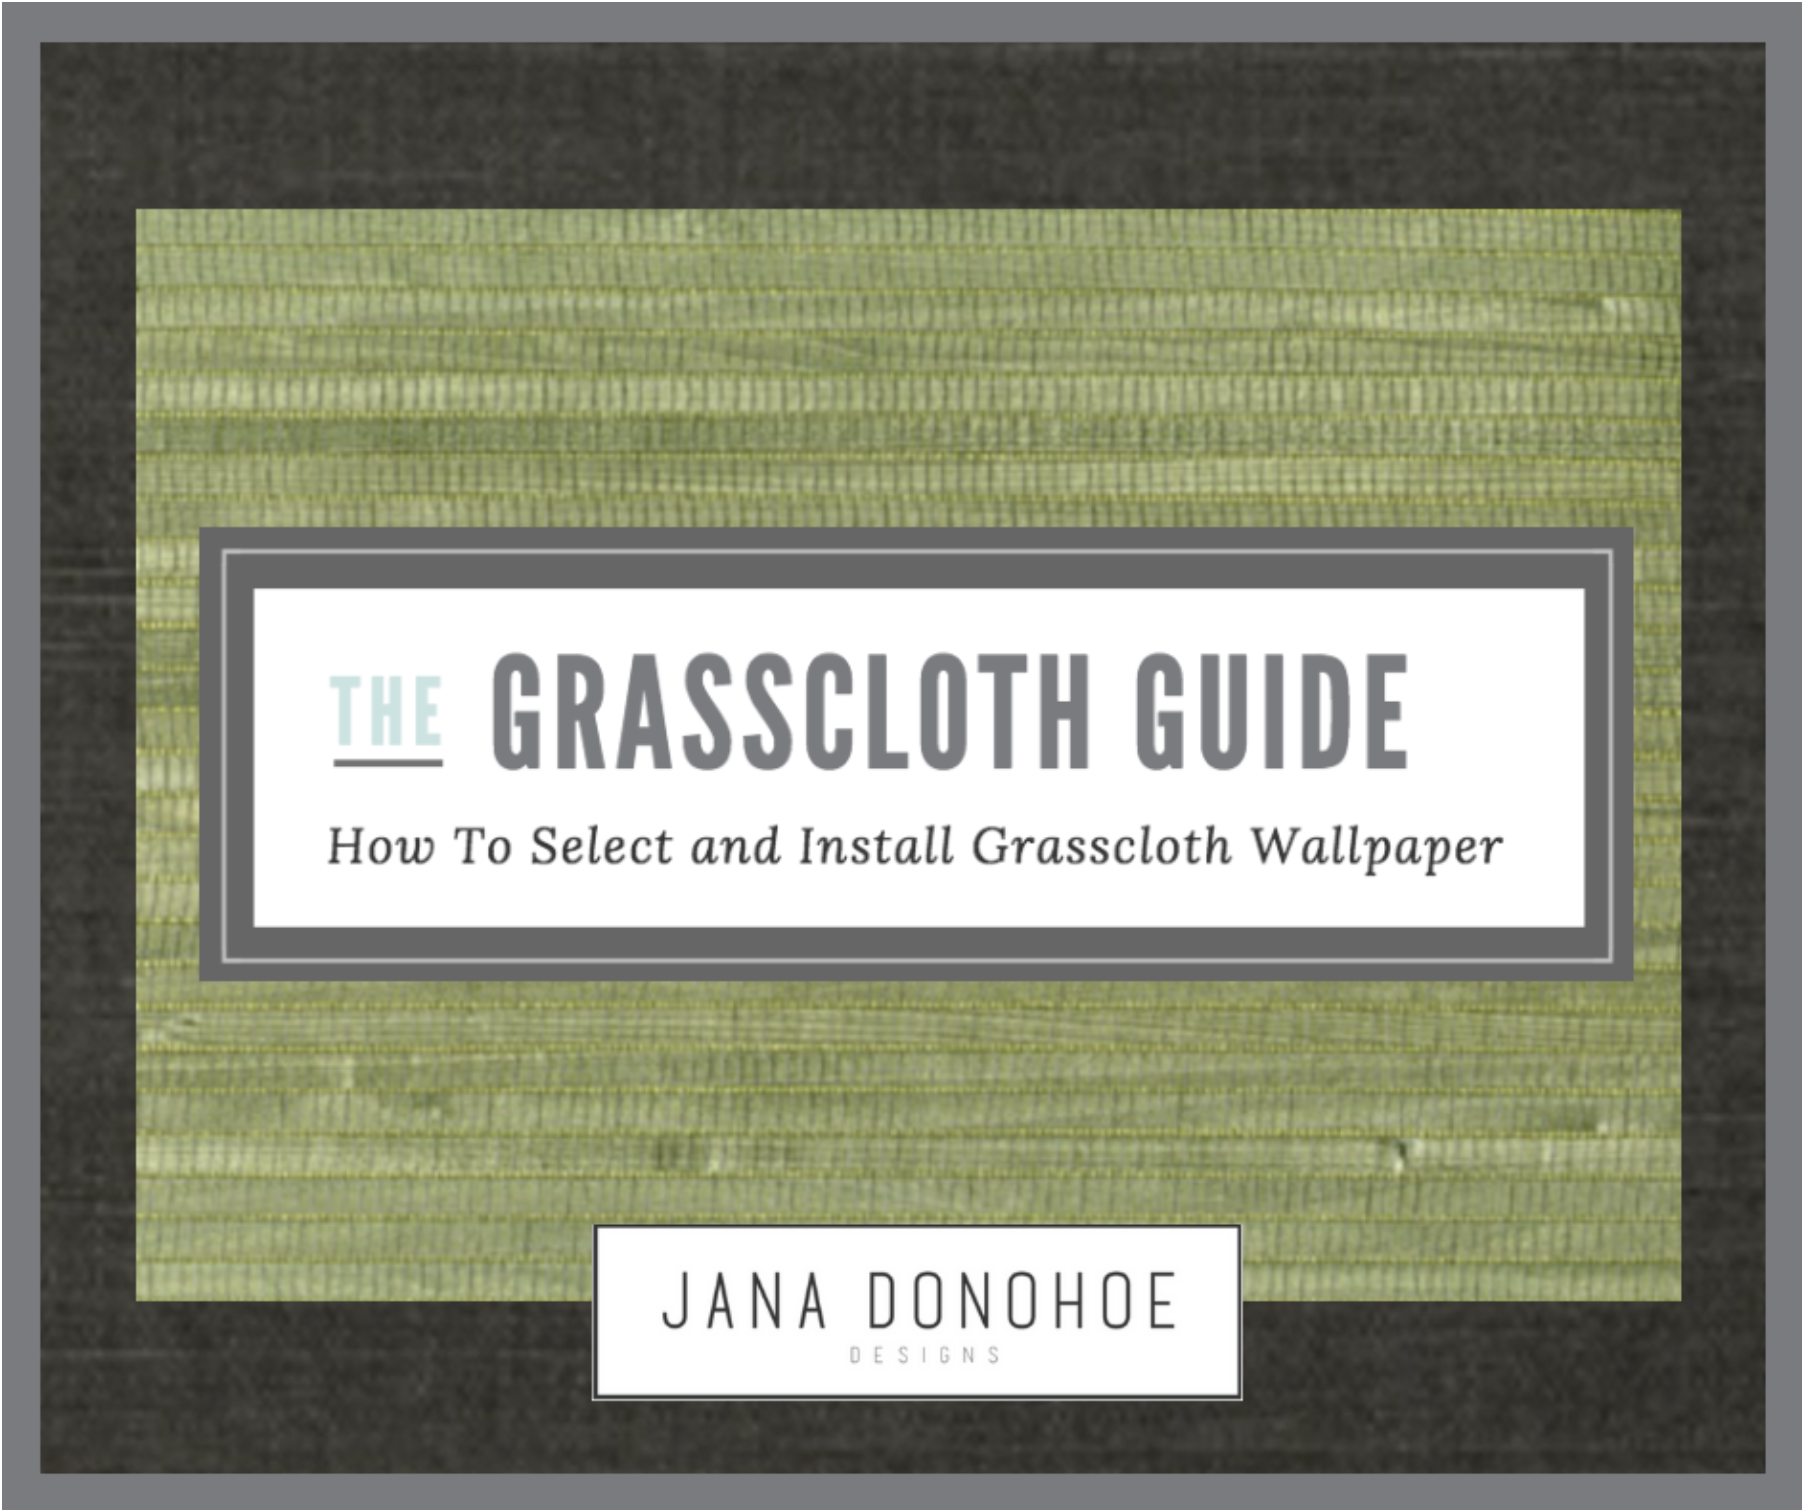 The Ultimate Guide on How To Install Grasscloth Wallpaper by interior designer, Jana Donohoe of Fayetteville, North Carolina based www.janadonohoedesigns.com